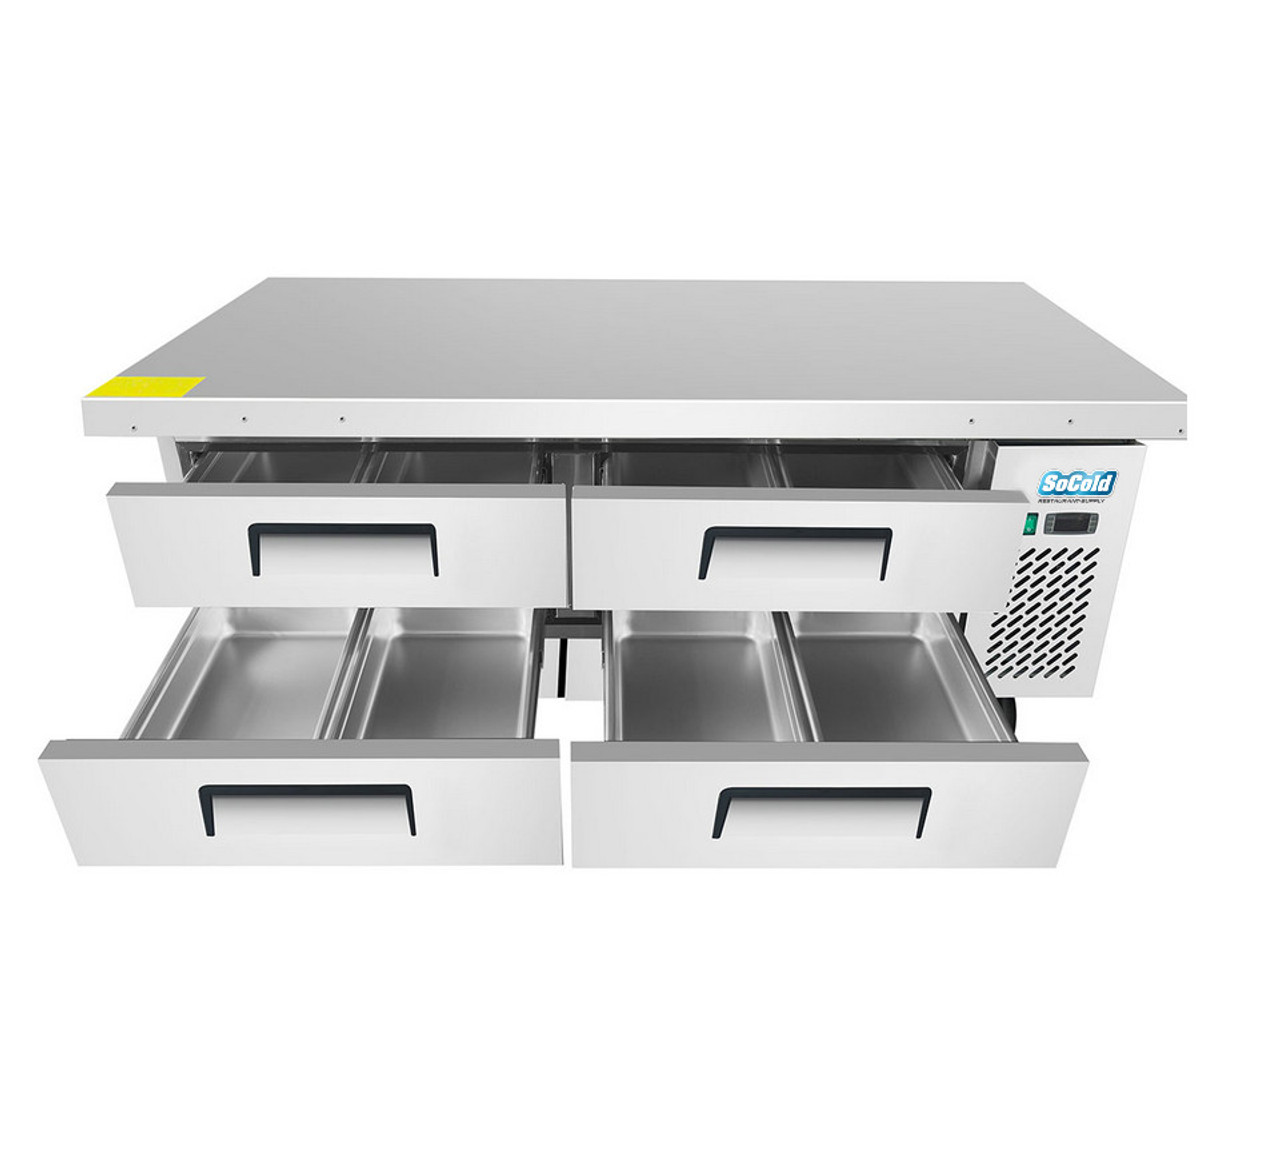 72" 4-Drawer Refrigerated Chef Base 